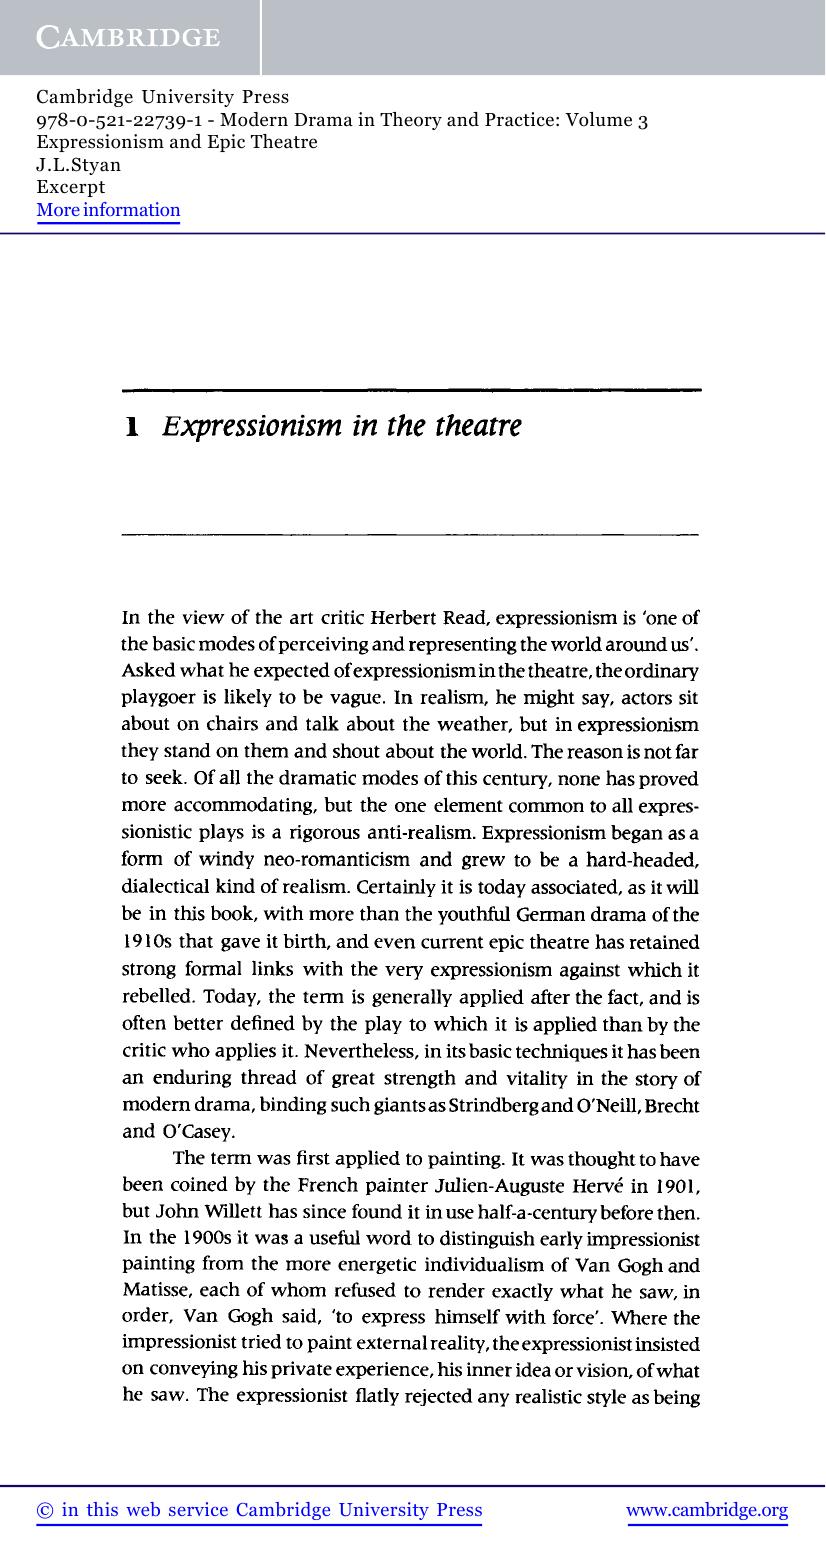 Modern drama in theory and practice: Expressionism and epic theatre, VOLUME 3